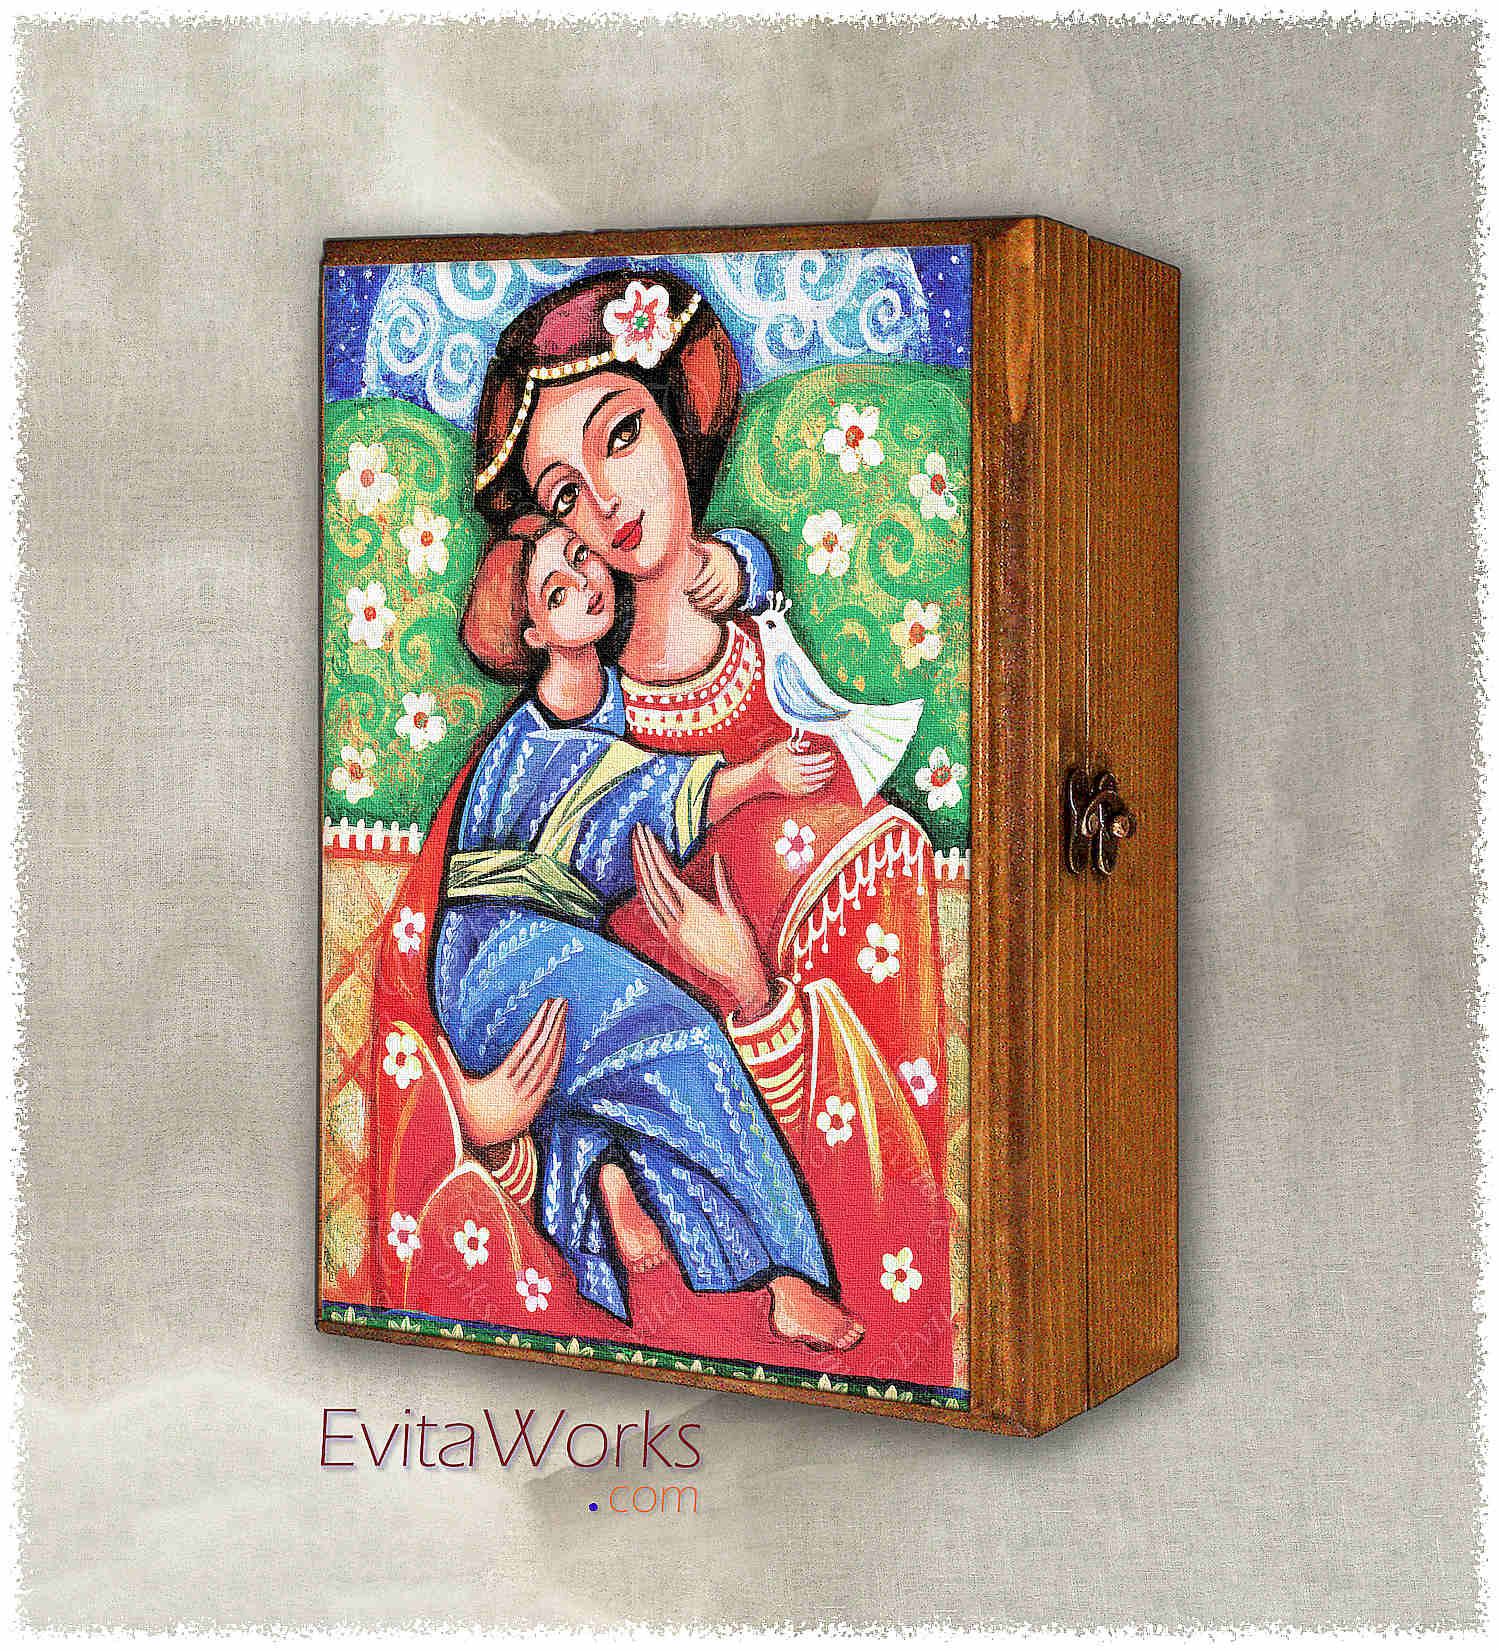 Hit to learn about "Madonna and Child, Christian Folk Icon" on jewelboxes